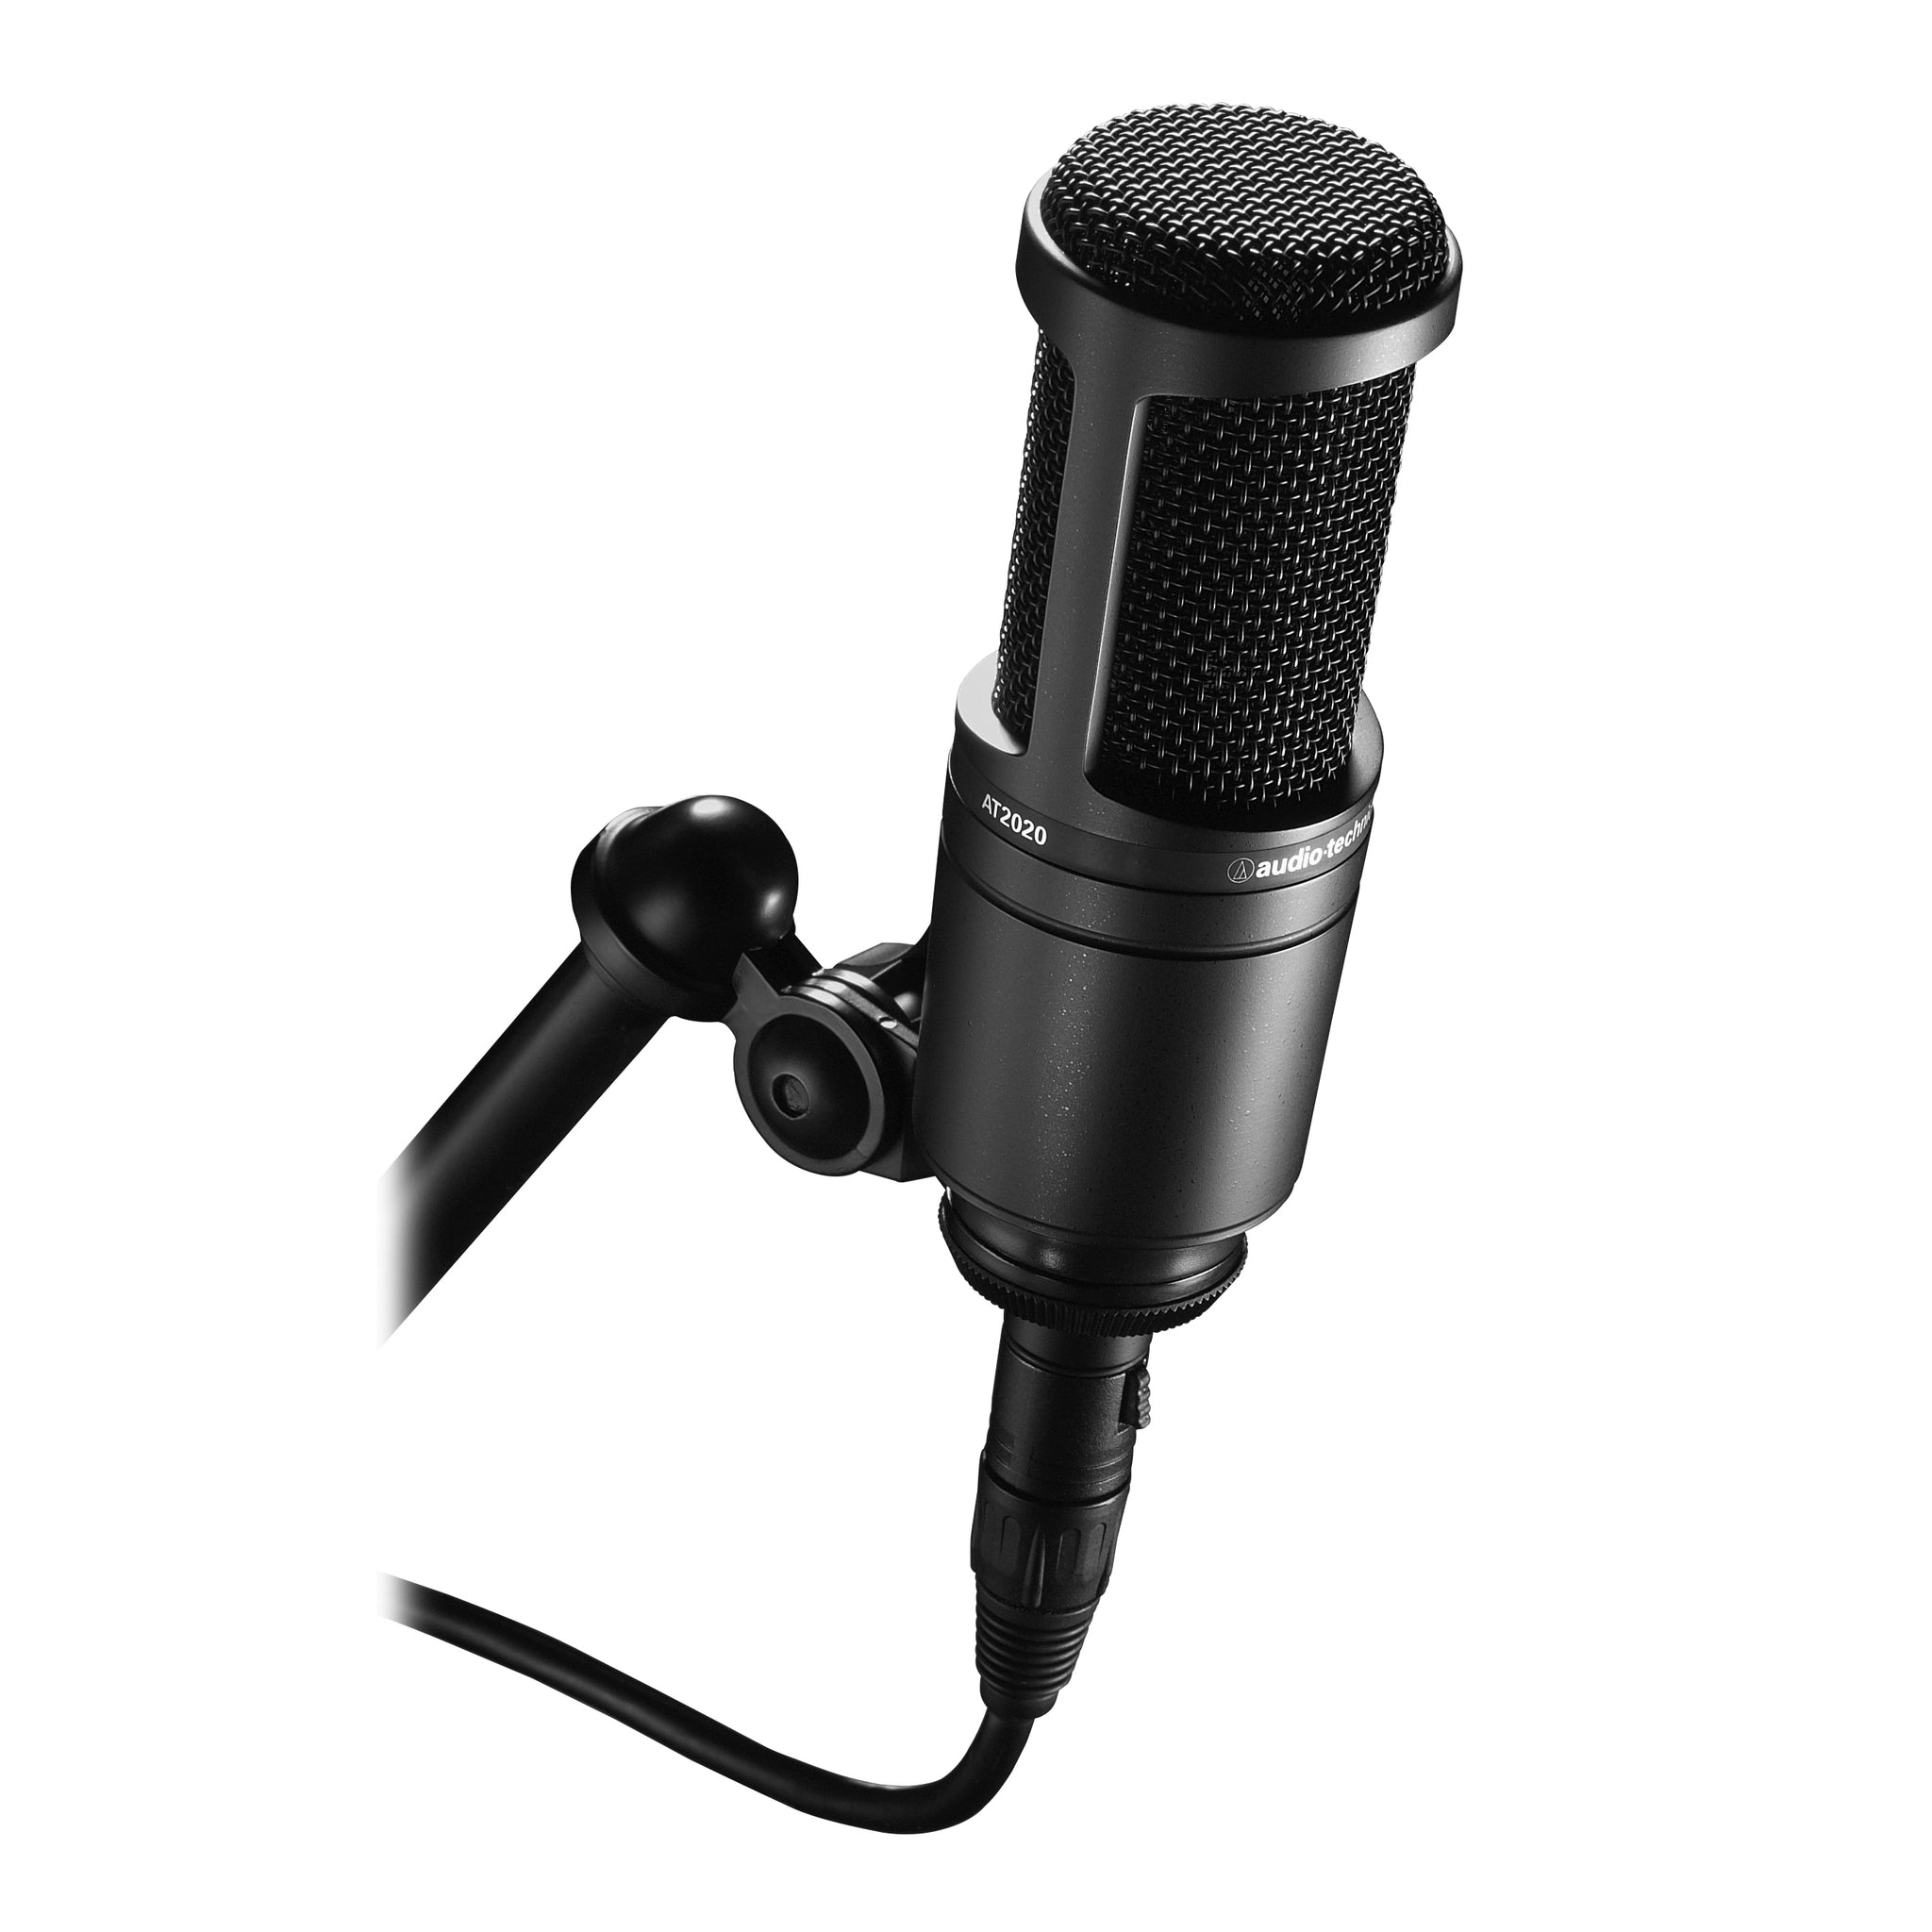  Audio-Technica AT2020USB Cardioid Condenser USB Microphone  (Discontinued),black : Musical Instruments